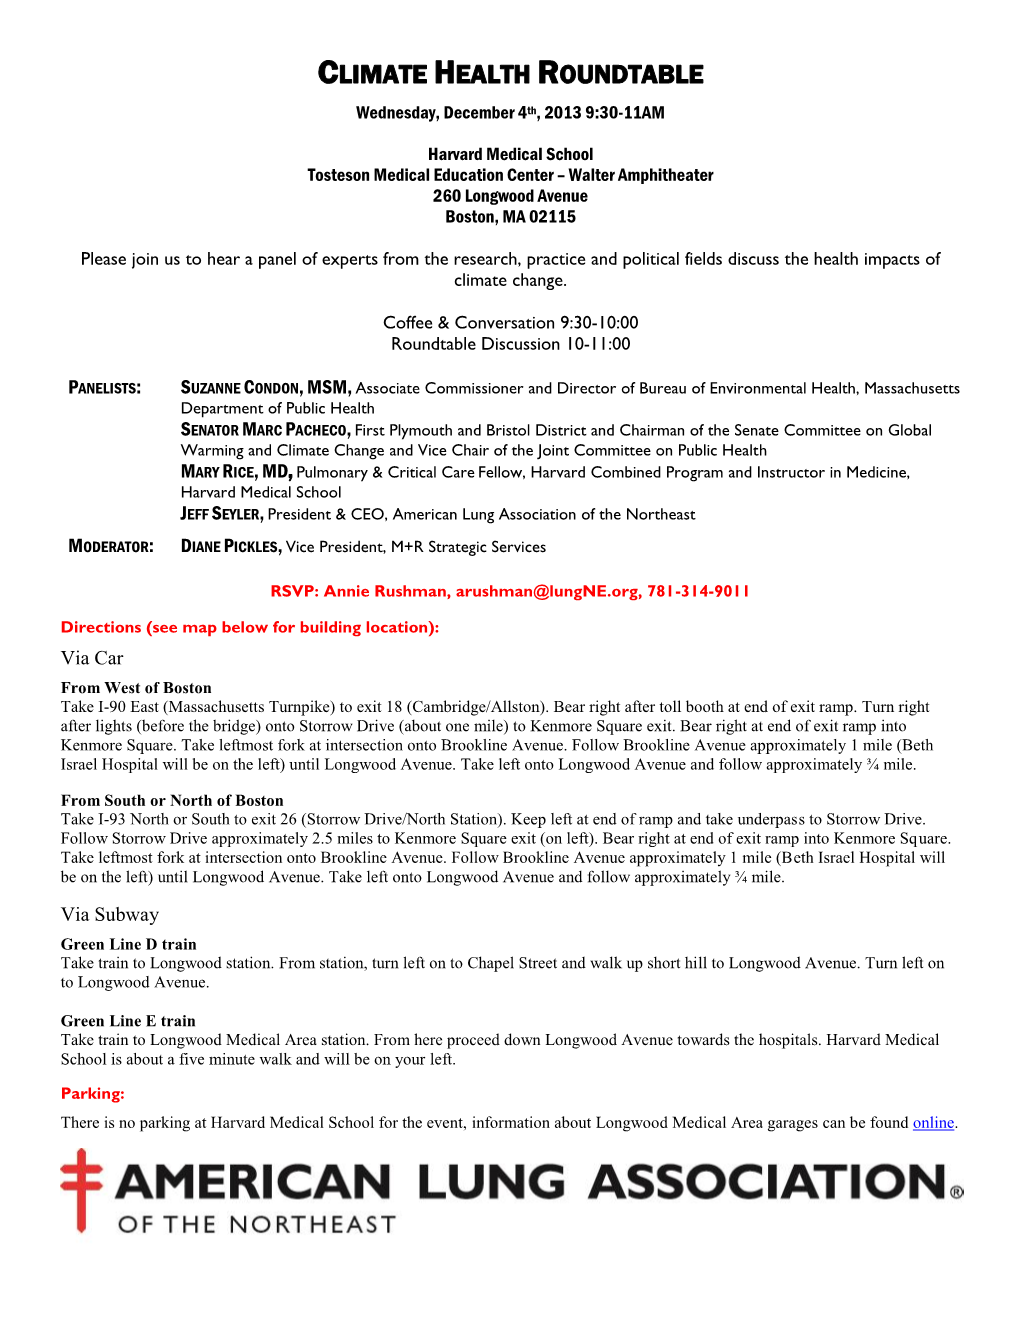 CLIMATE HEALTH ROUNDTABLE Wednesday, December 4Th, 2013 9:30-11AM